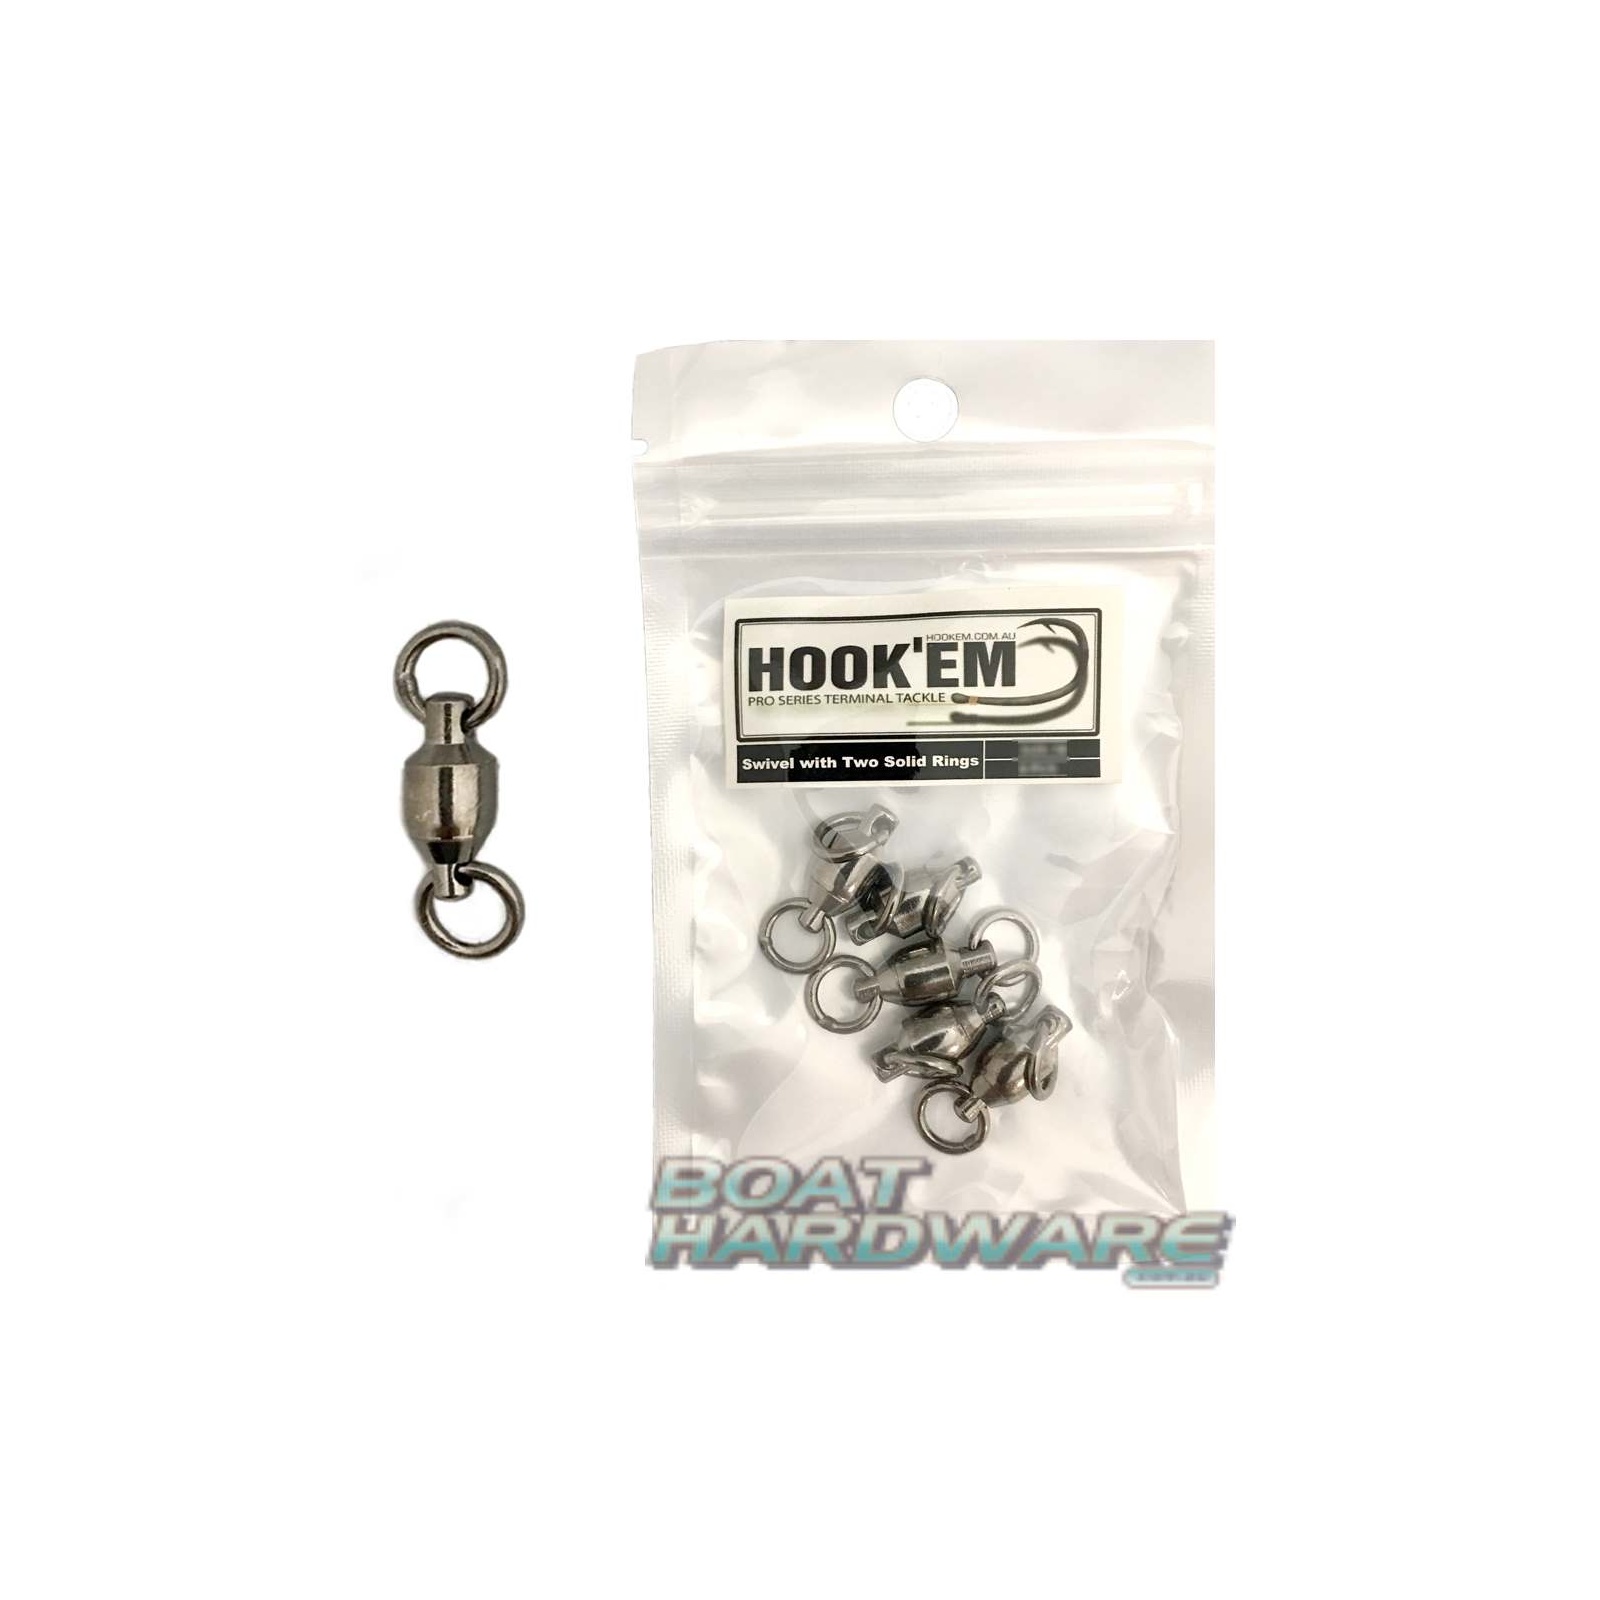 Size 6 Ball Bearing Swivel - 2 Solid Rings (Pack of 7)